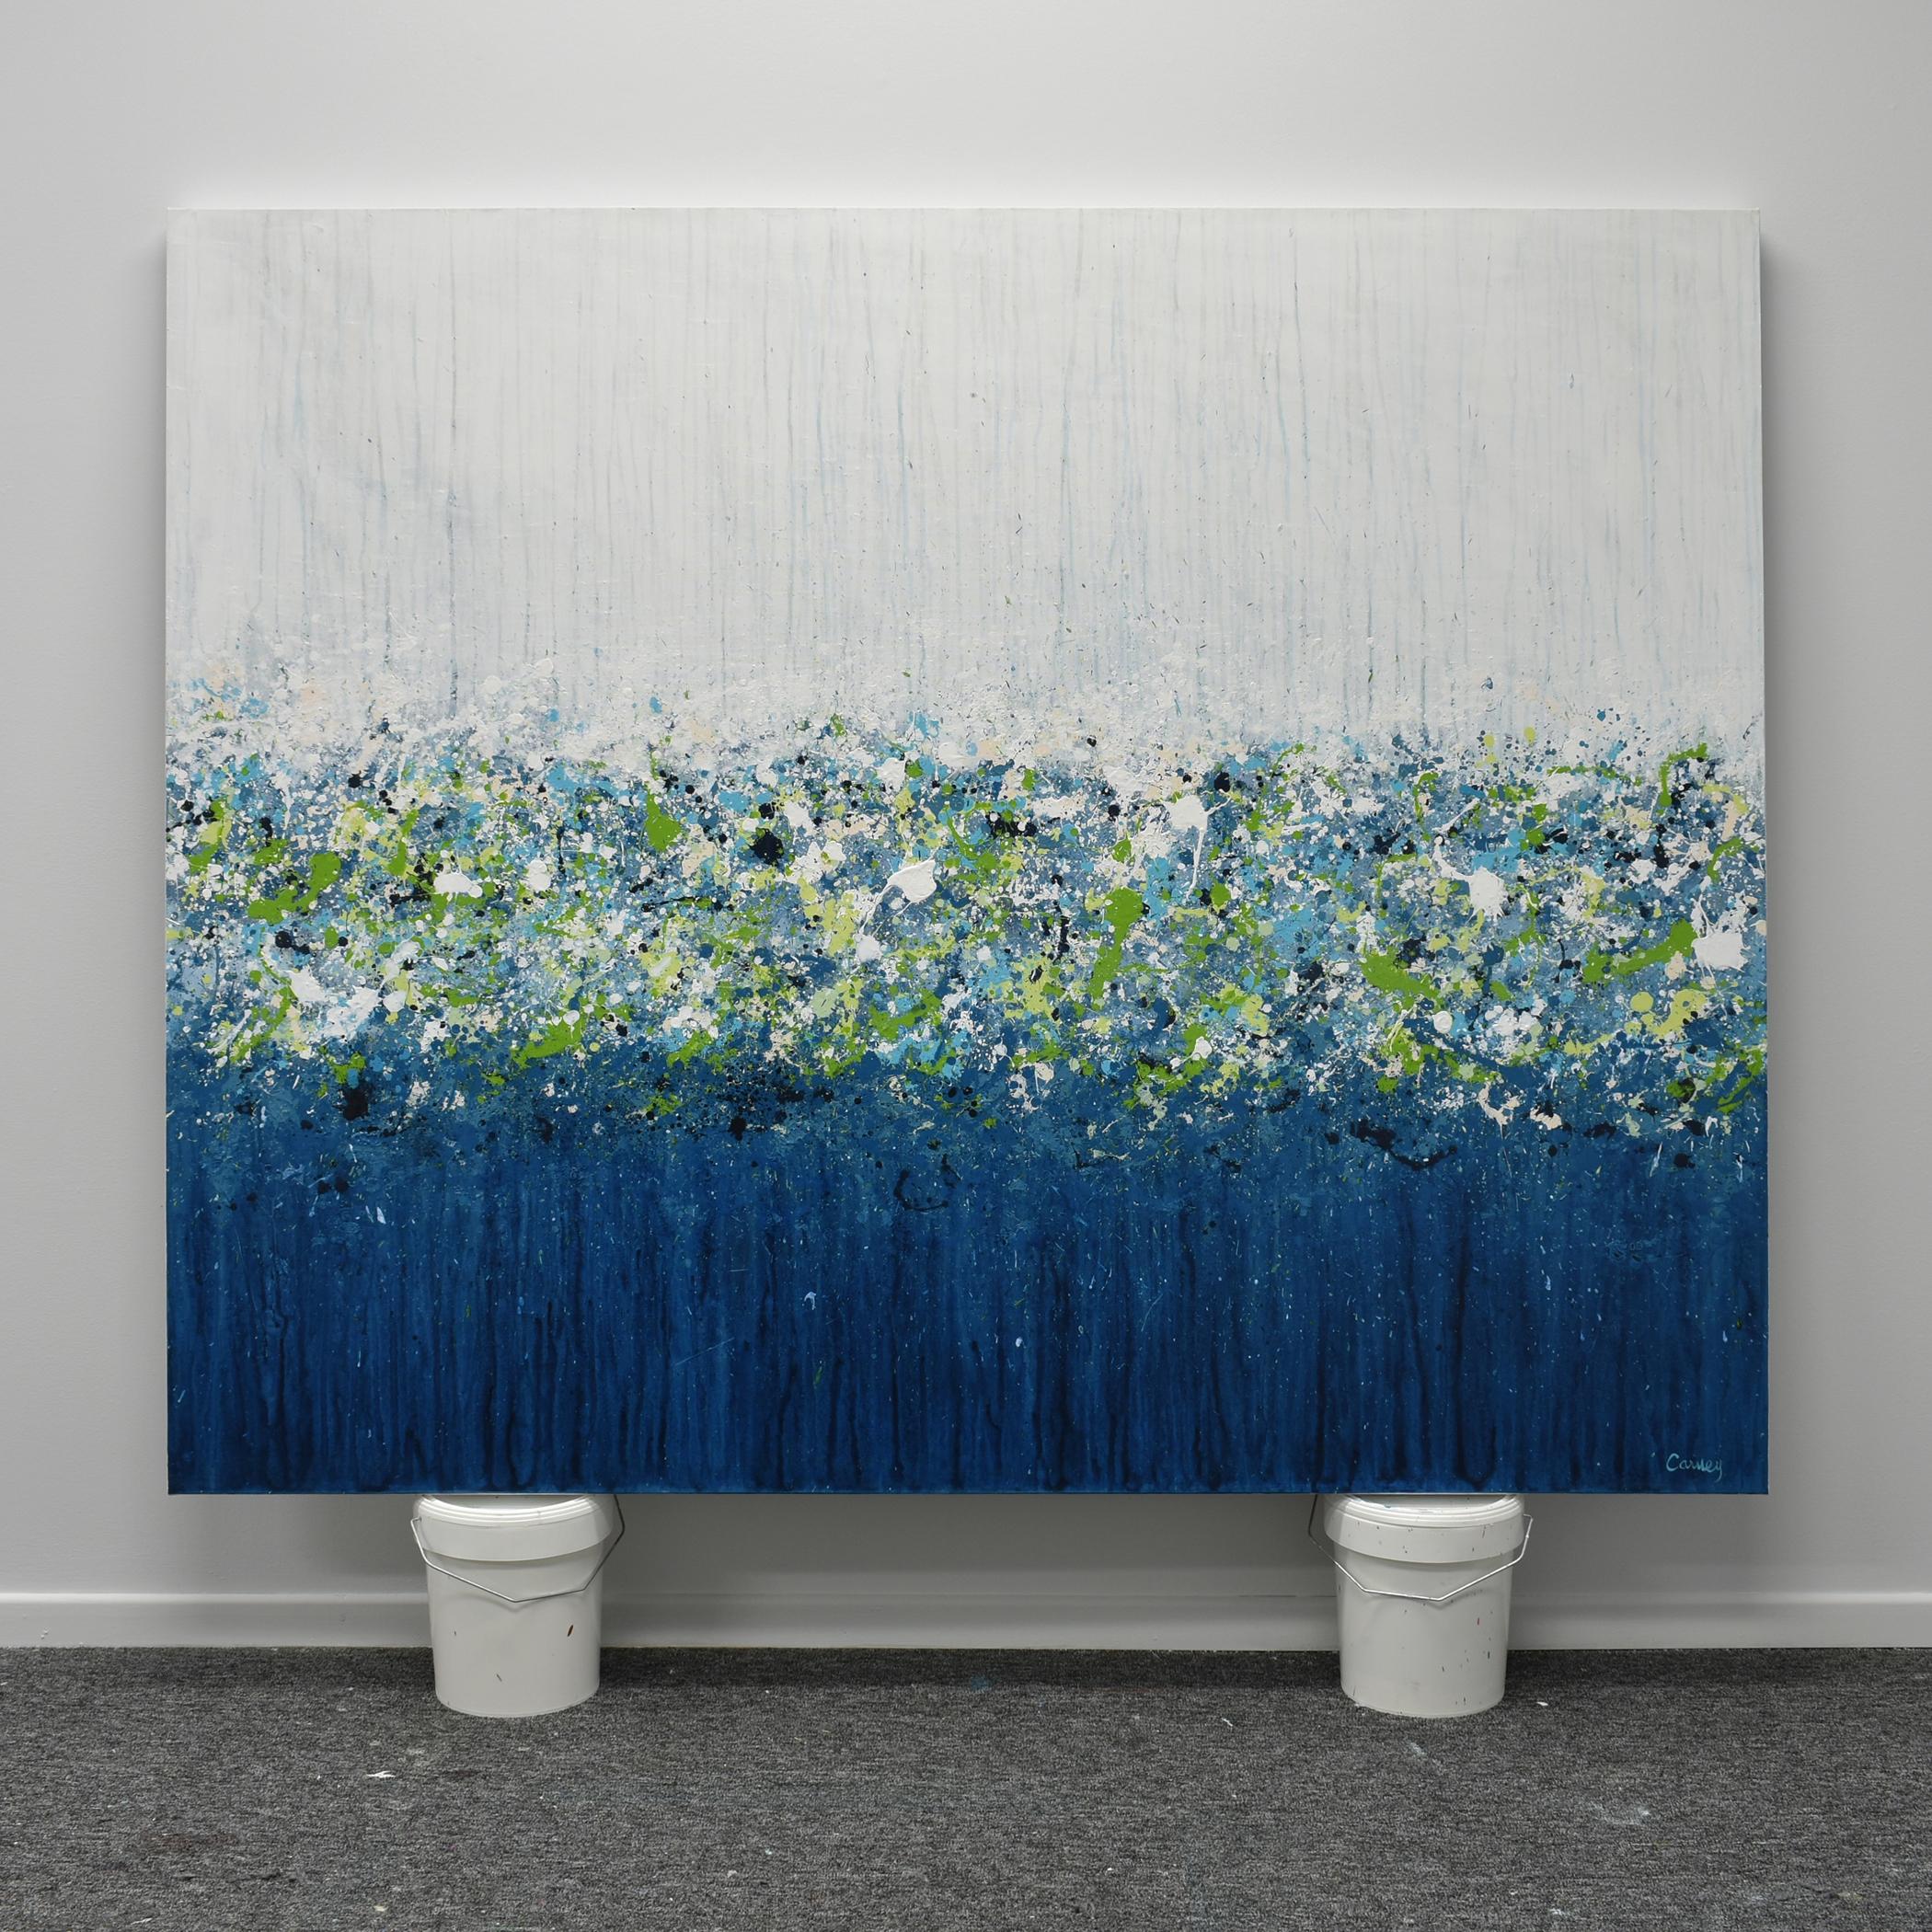 <p>Artist Comments<br>As part of her ongoing GeoFlora series, artist Lisa Carney paints an abstraction of a floral landscape. Buds of blue, white, and green bloom at the juncture where the white and sapphire background meet. Lisa uses a drip